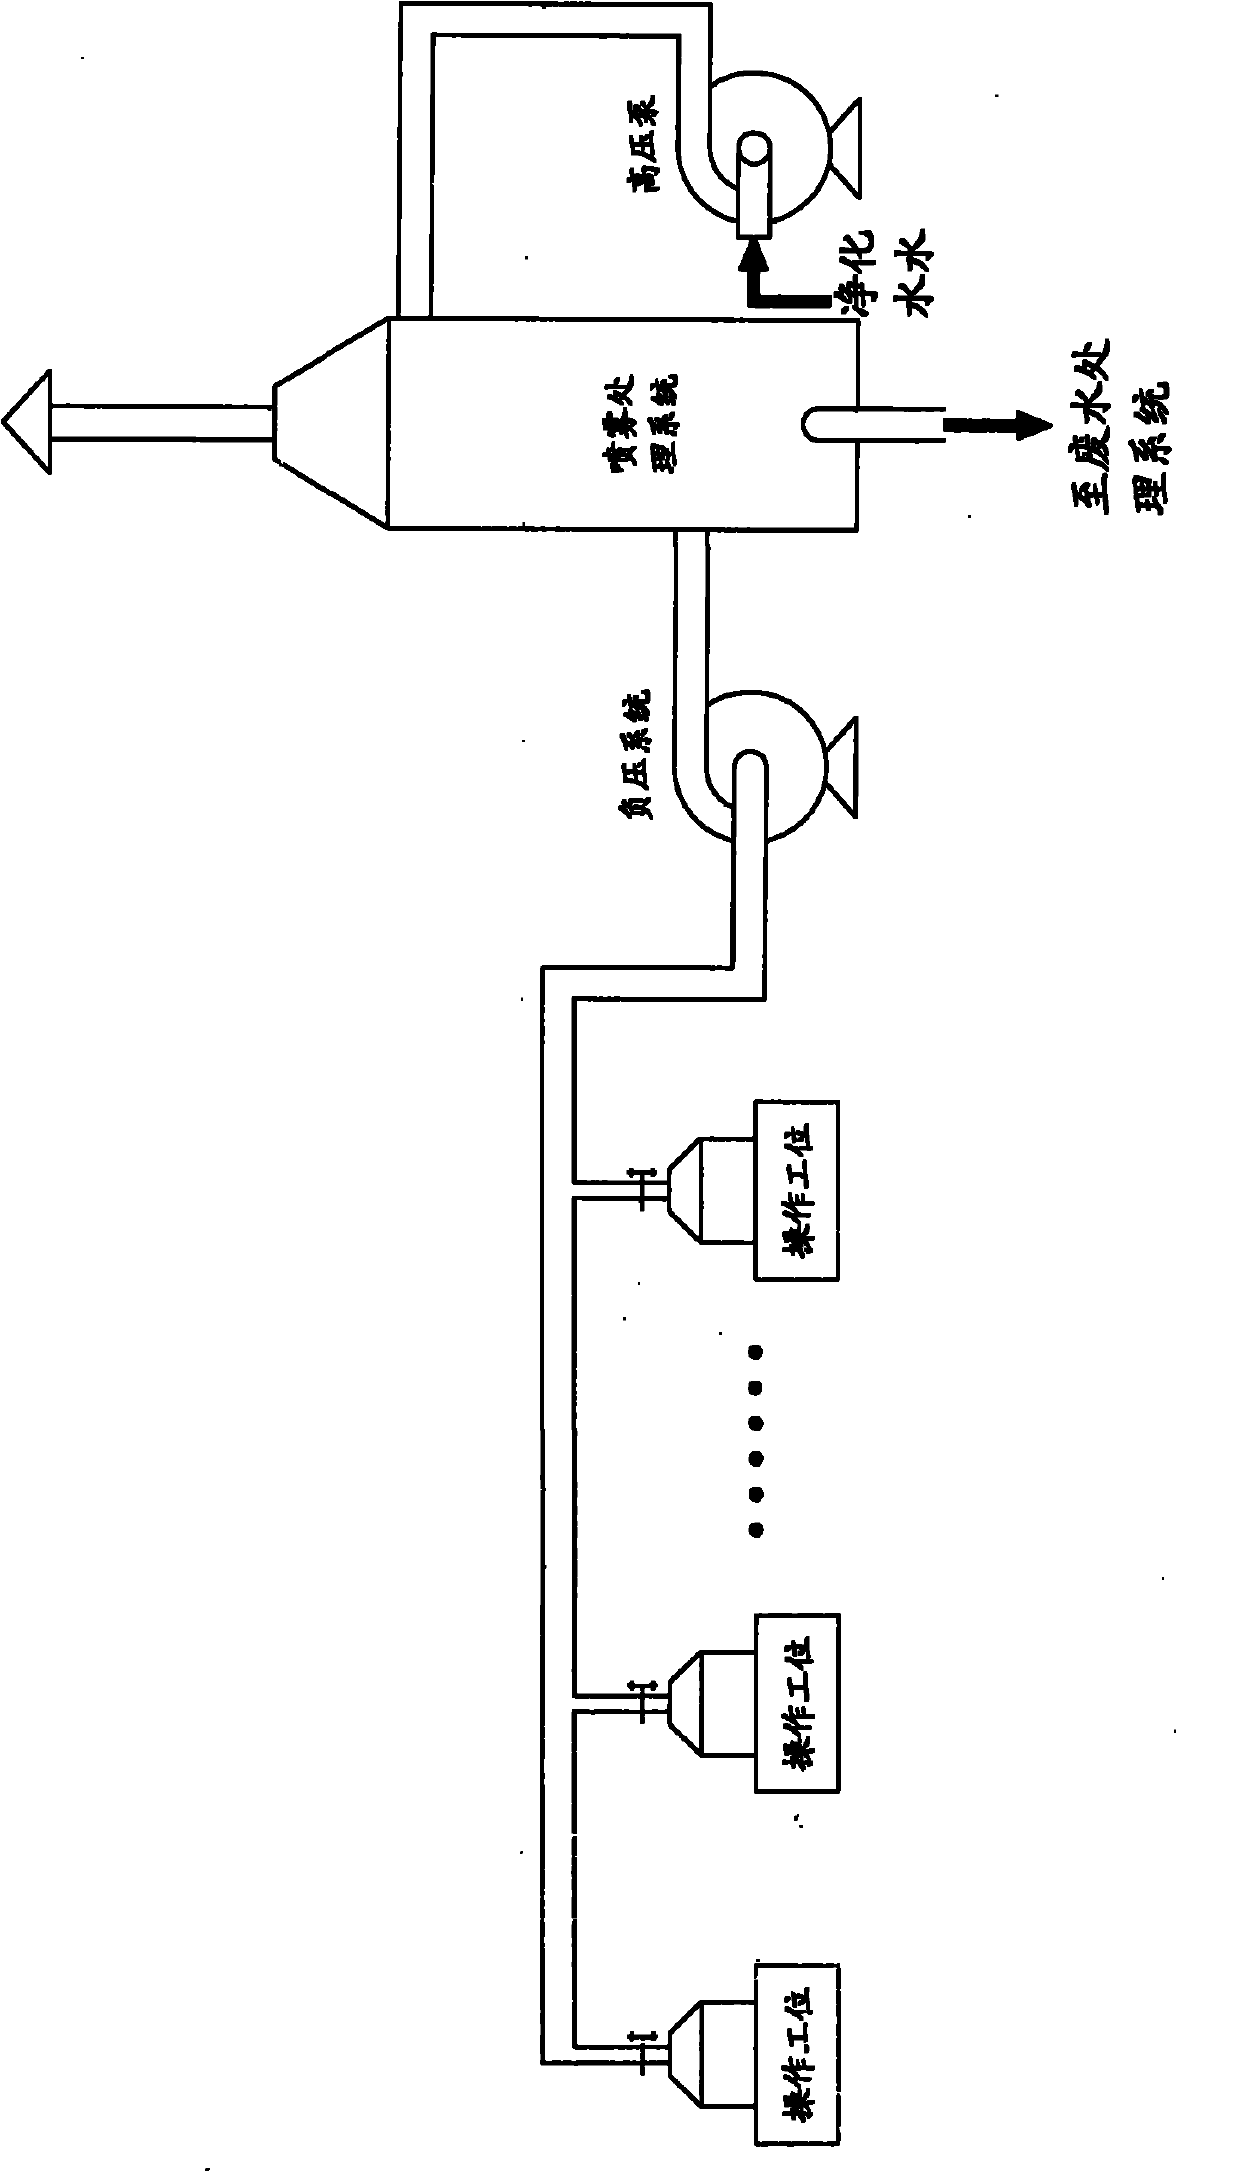 Environmental-protection treatment system for production process of lead-acid battery polar plate